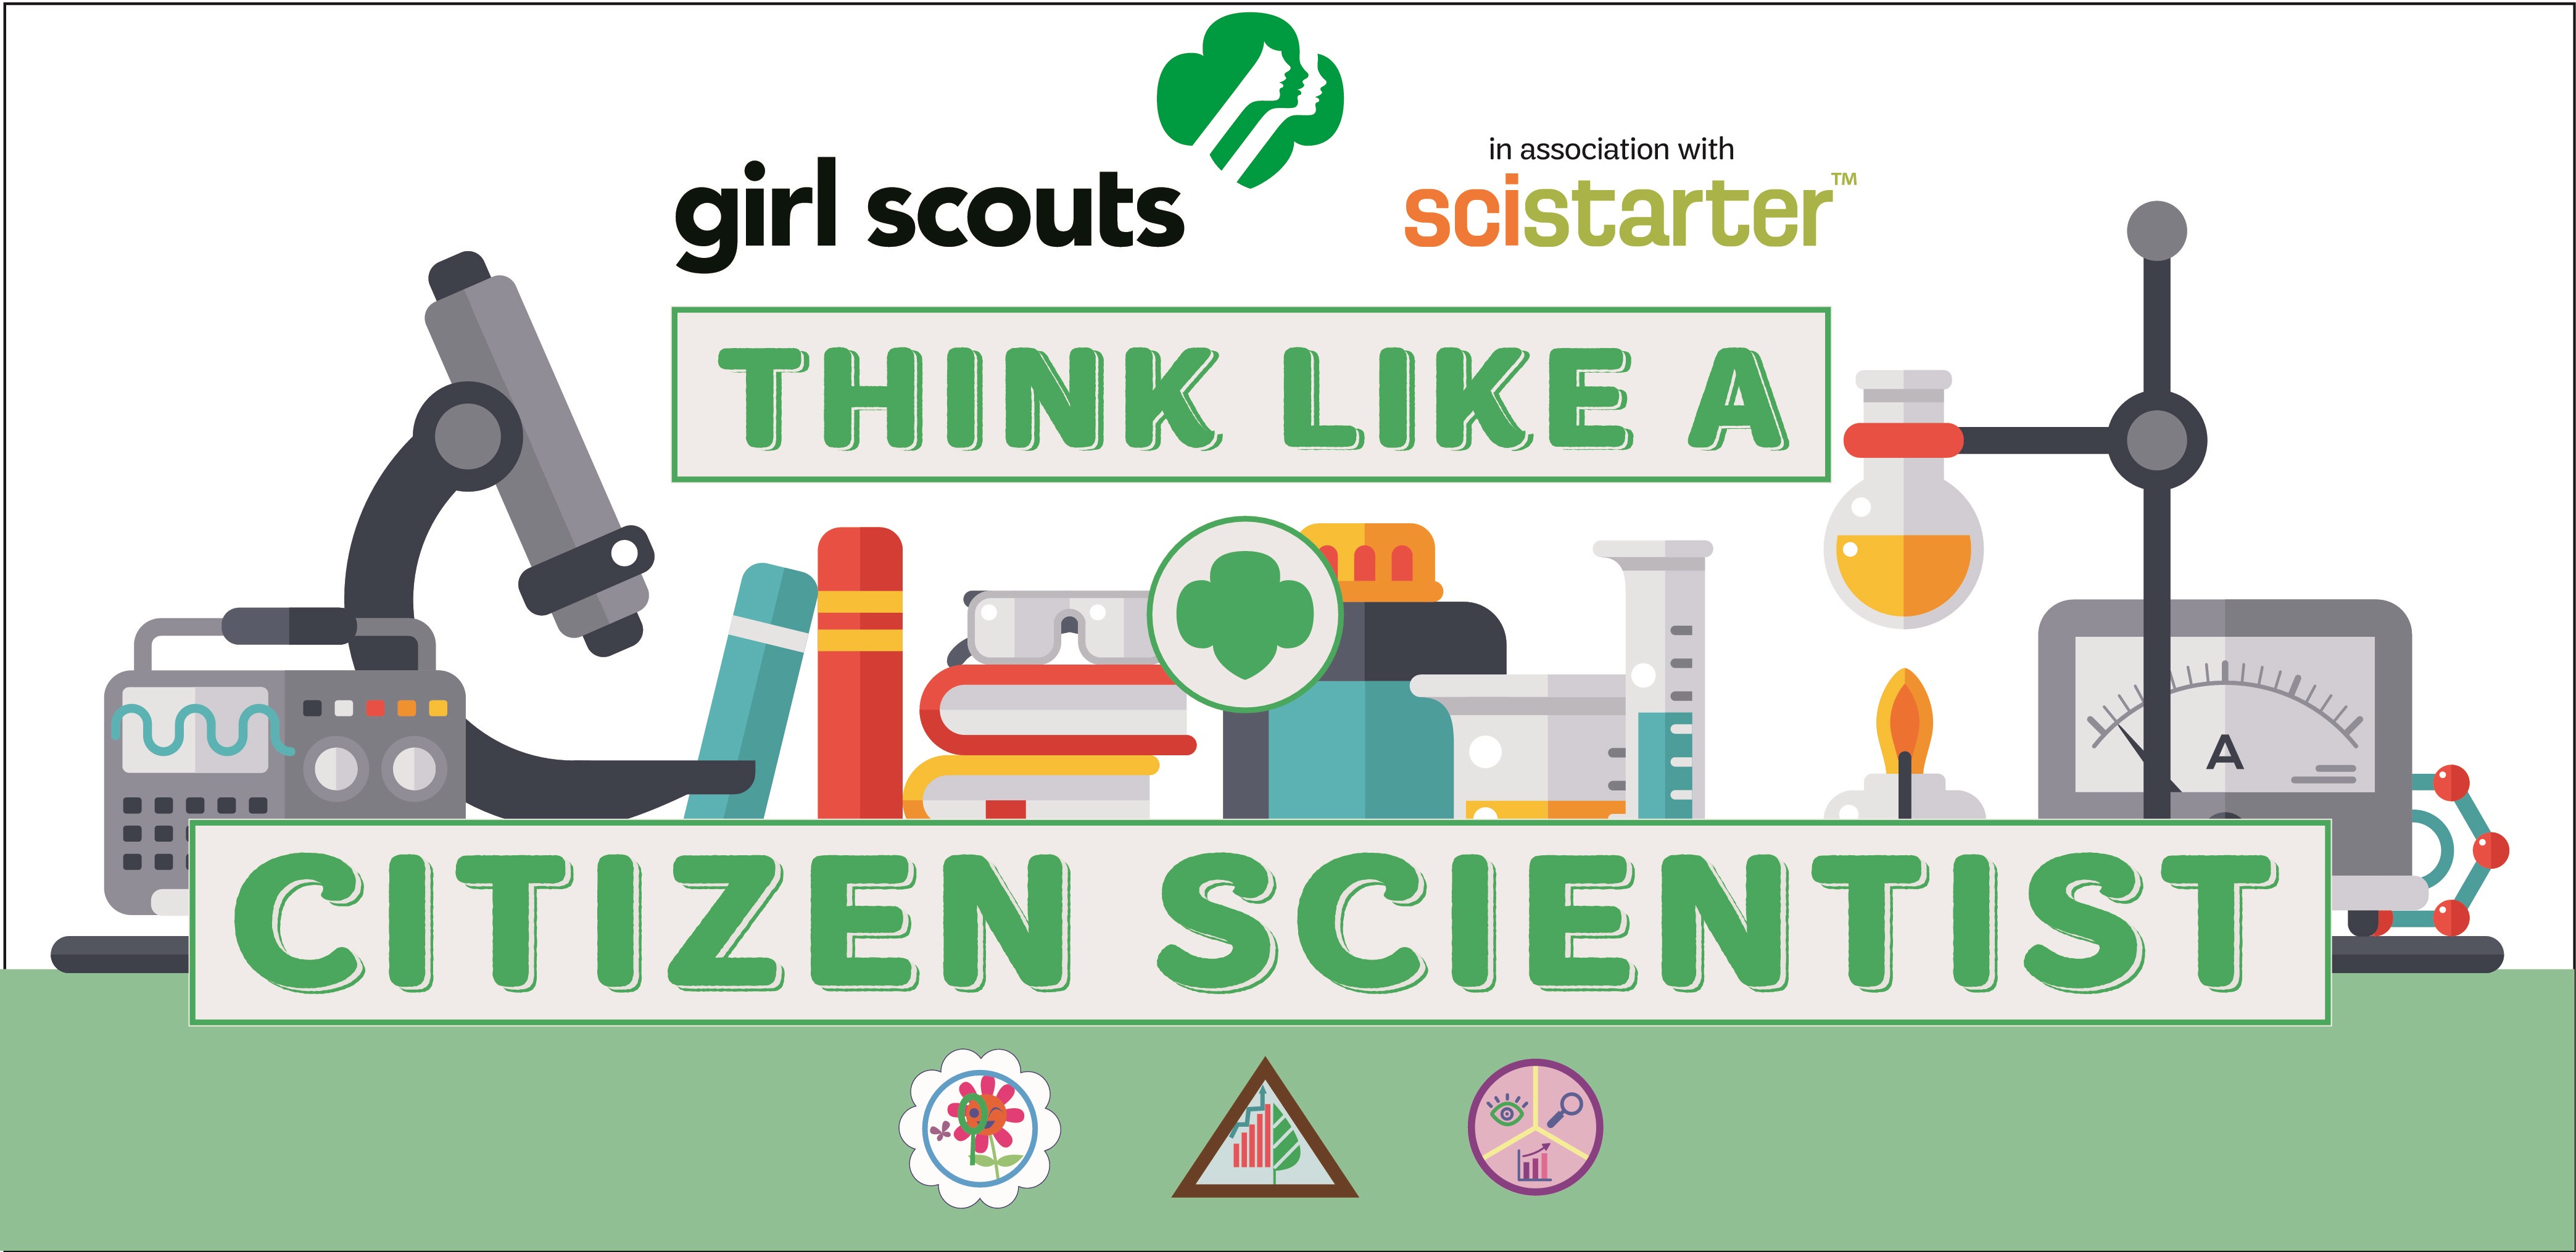 Girl Scouts and SciStarter Encourage Girls to Engage in Scientific Research